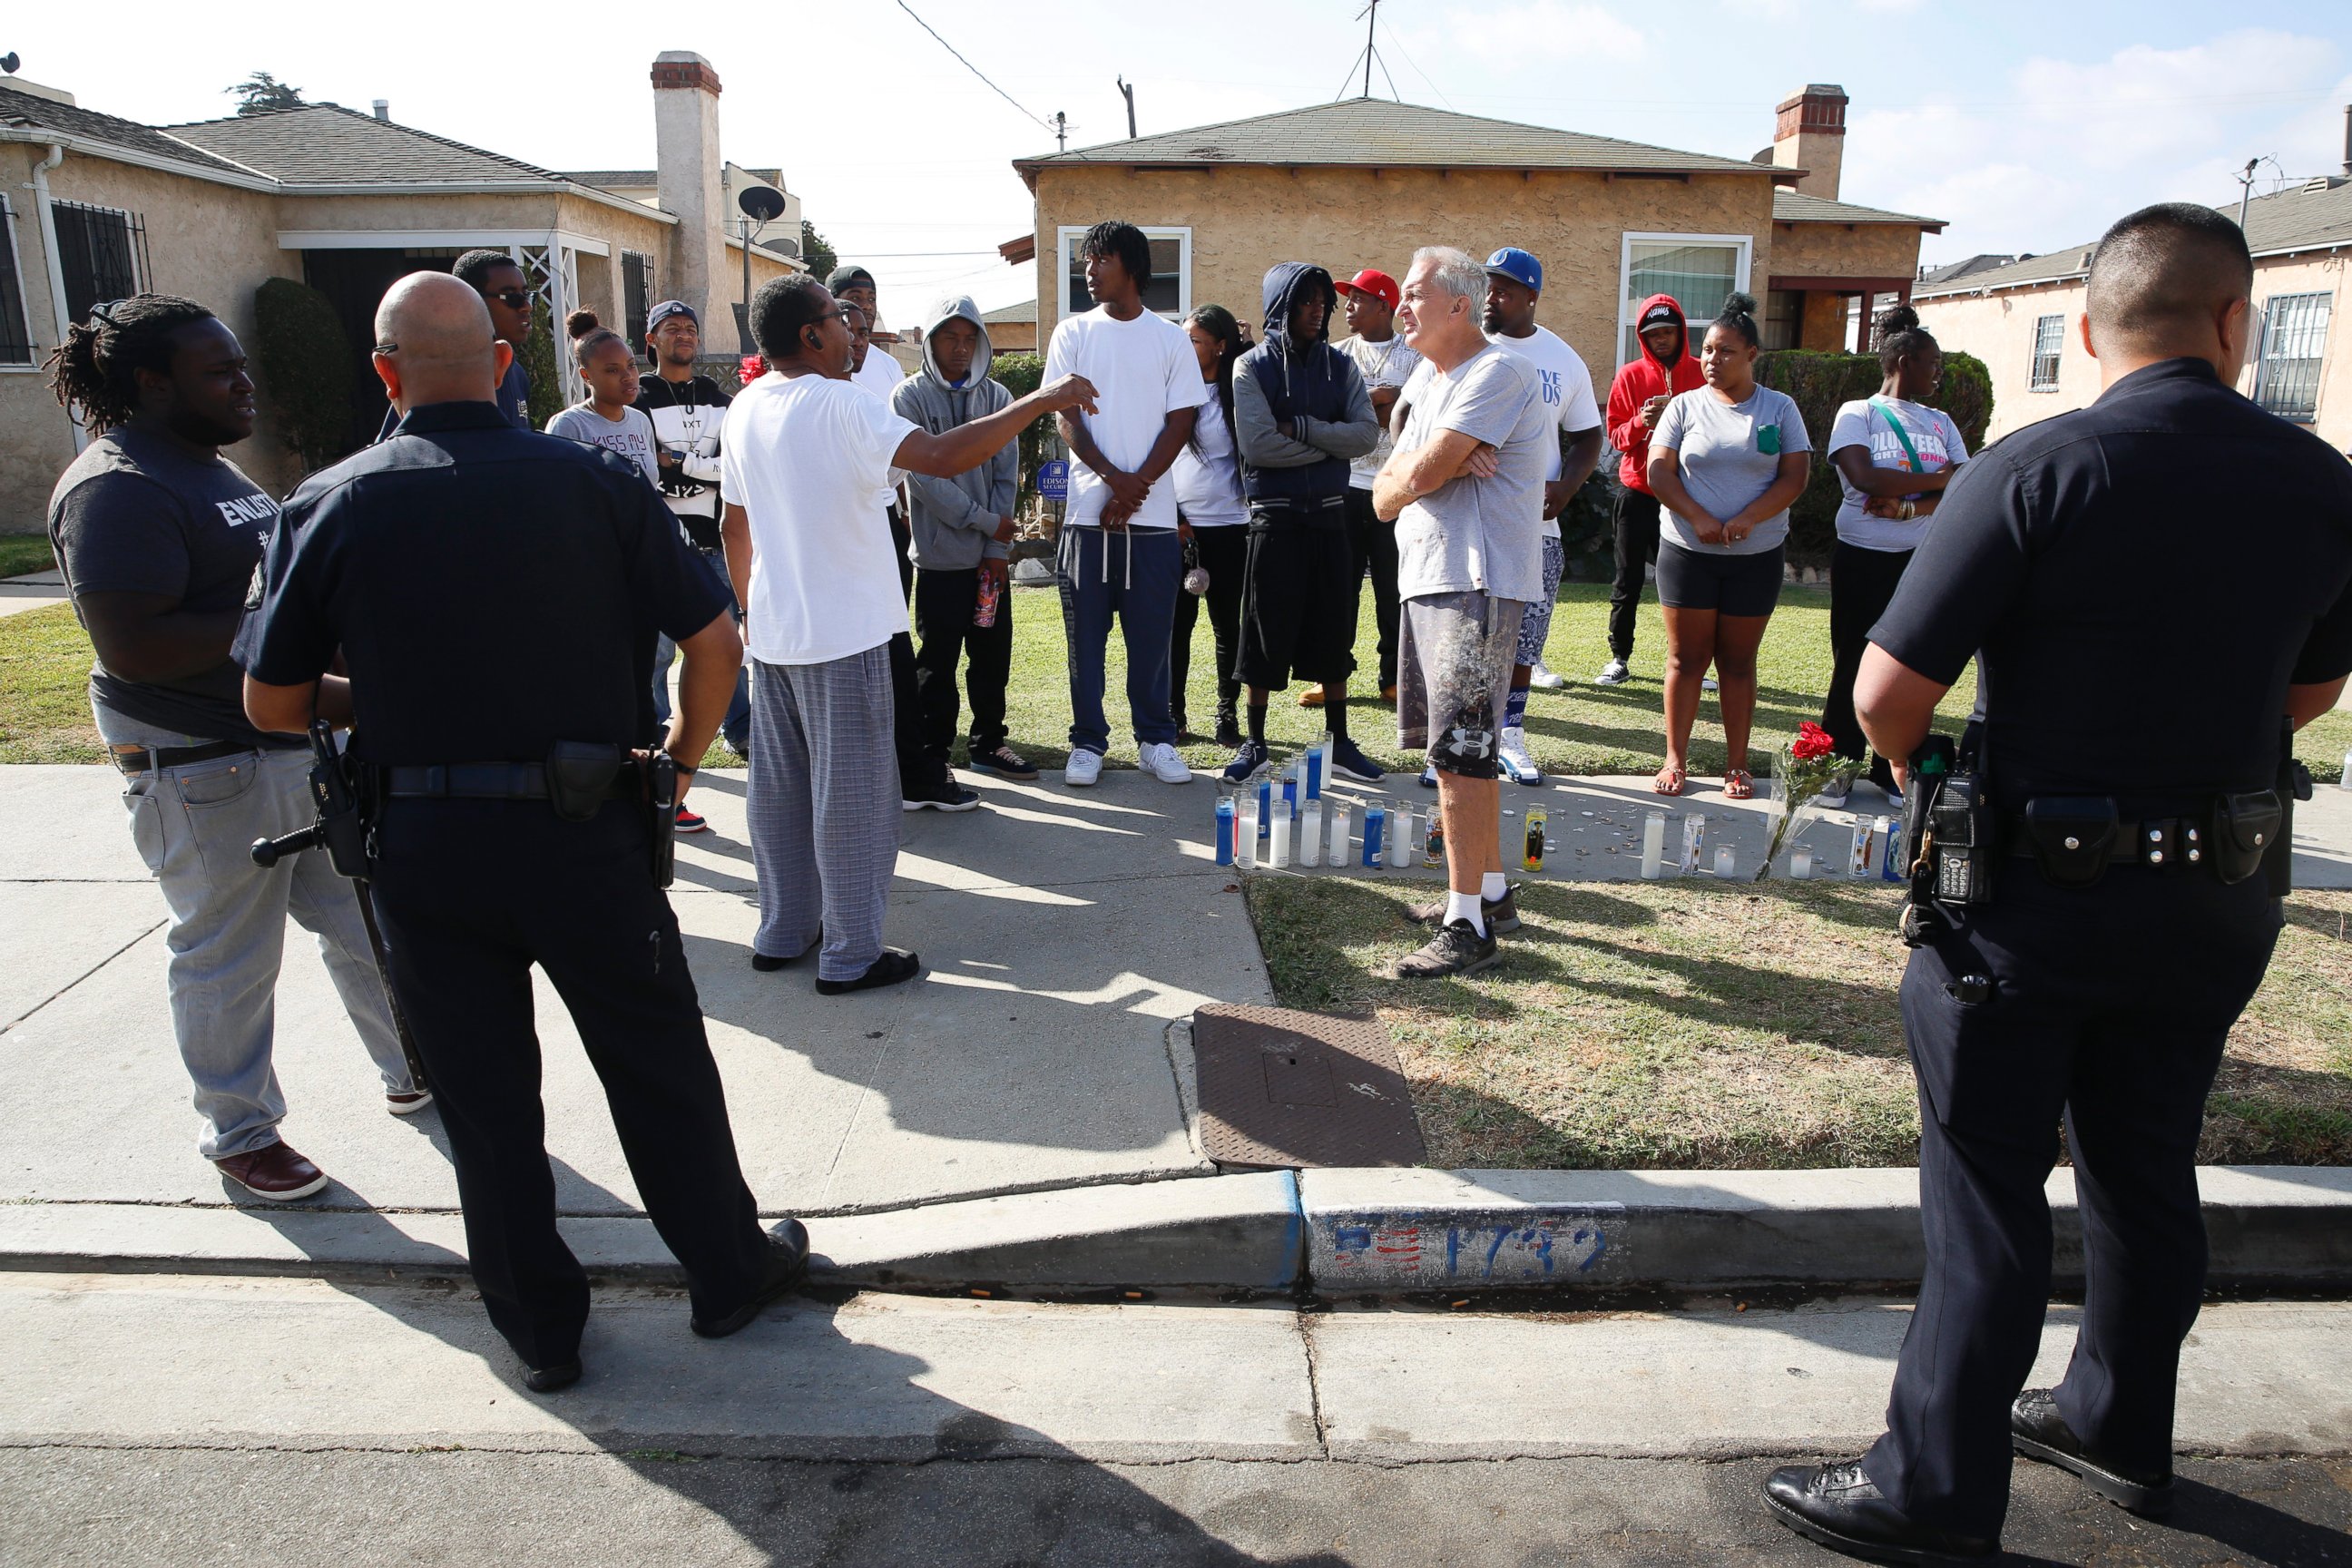 PHOTO: Los Angeles Police officers speak to neighbors and members of the community gathered around a makeshift memorial outside a residence, on Oct. 2, 2016. 